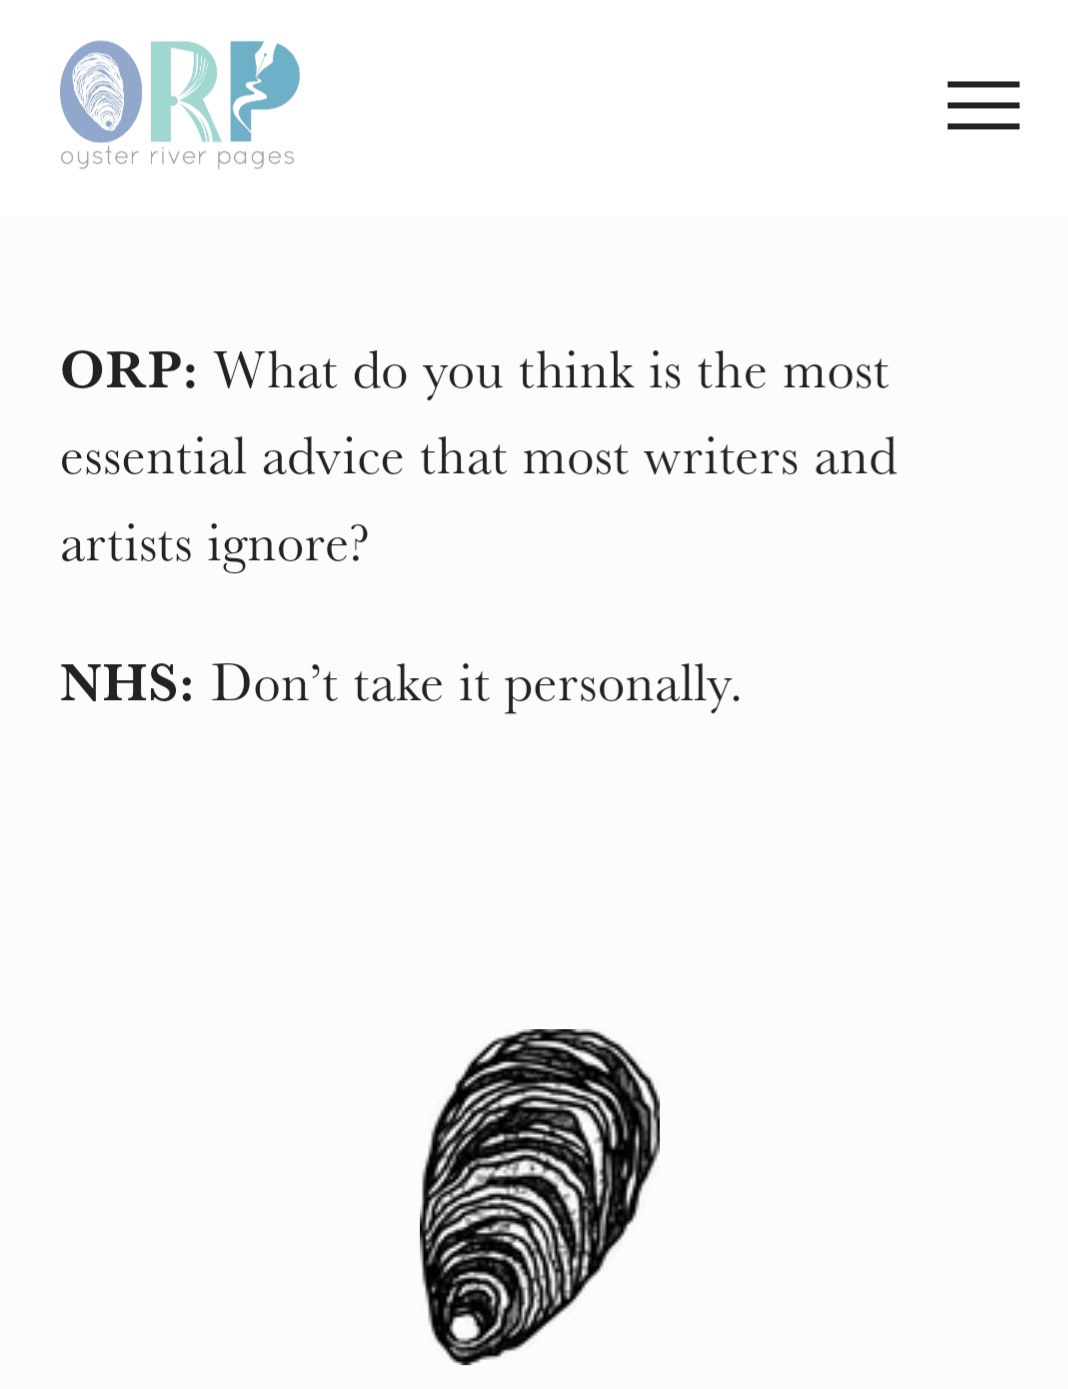 Oyster River Pages writing advice